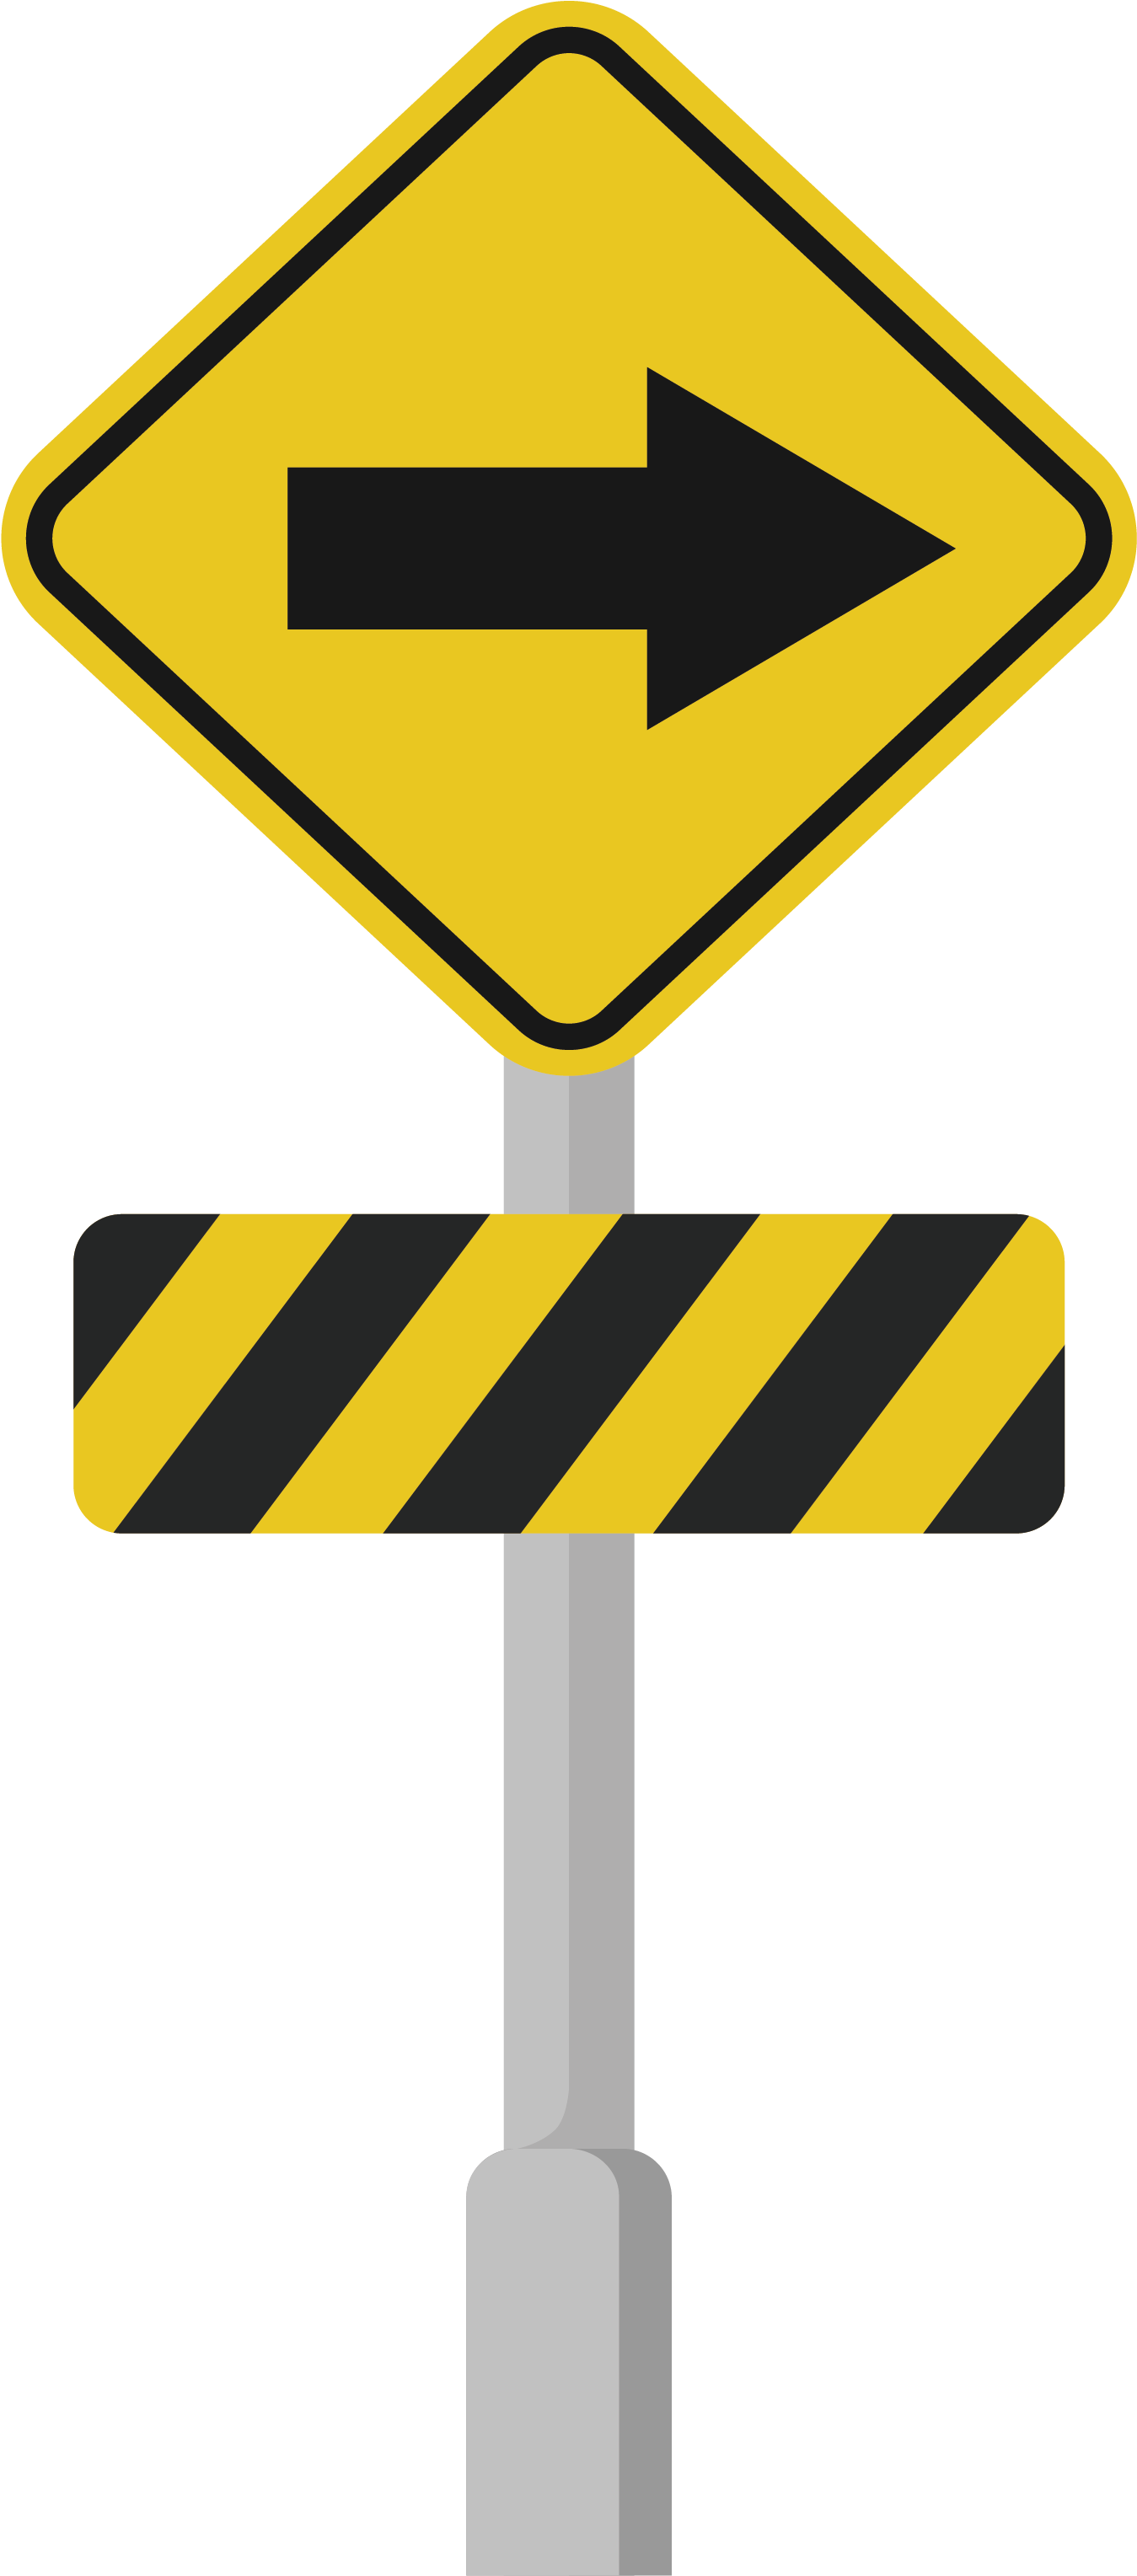 A Yellow And Black Road Sign